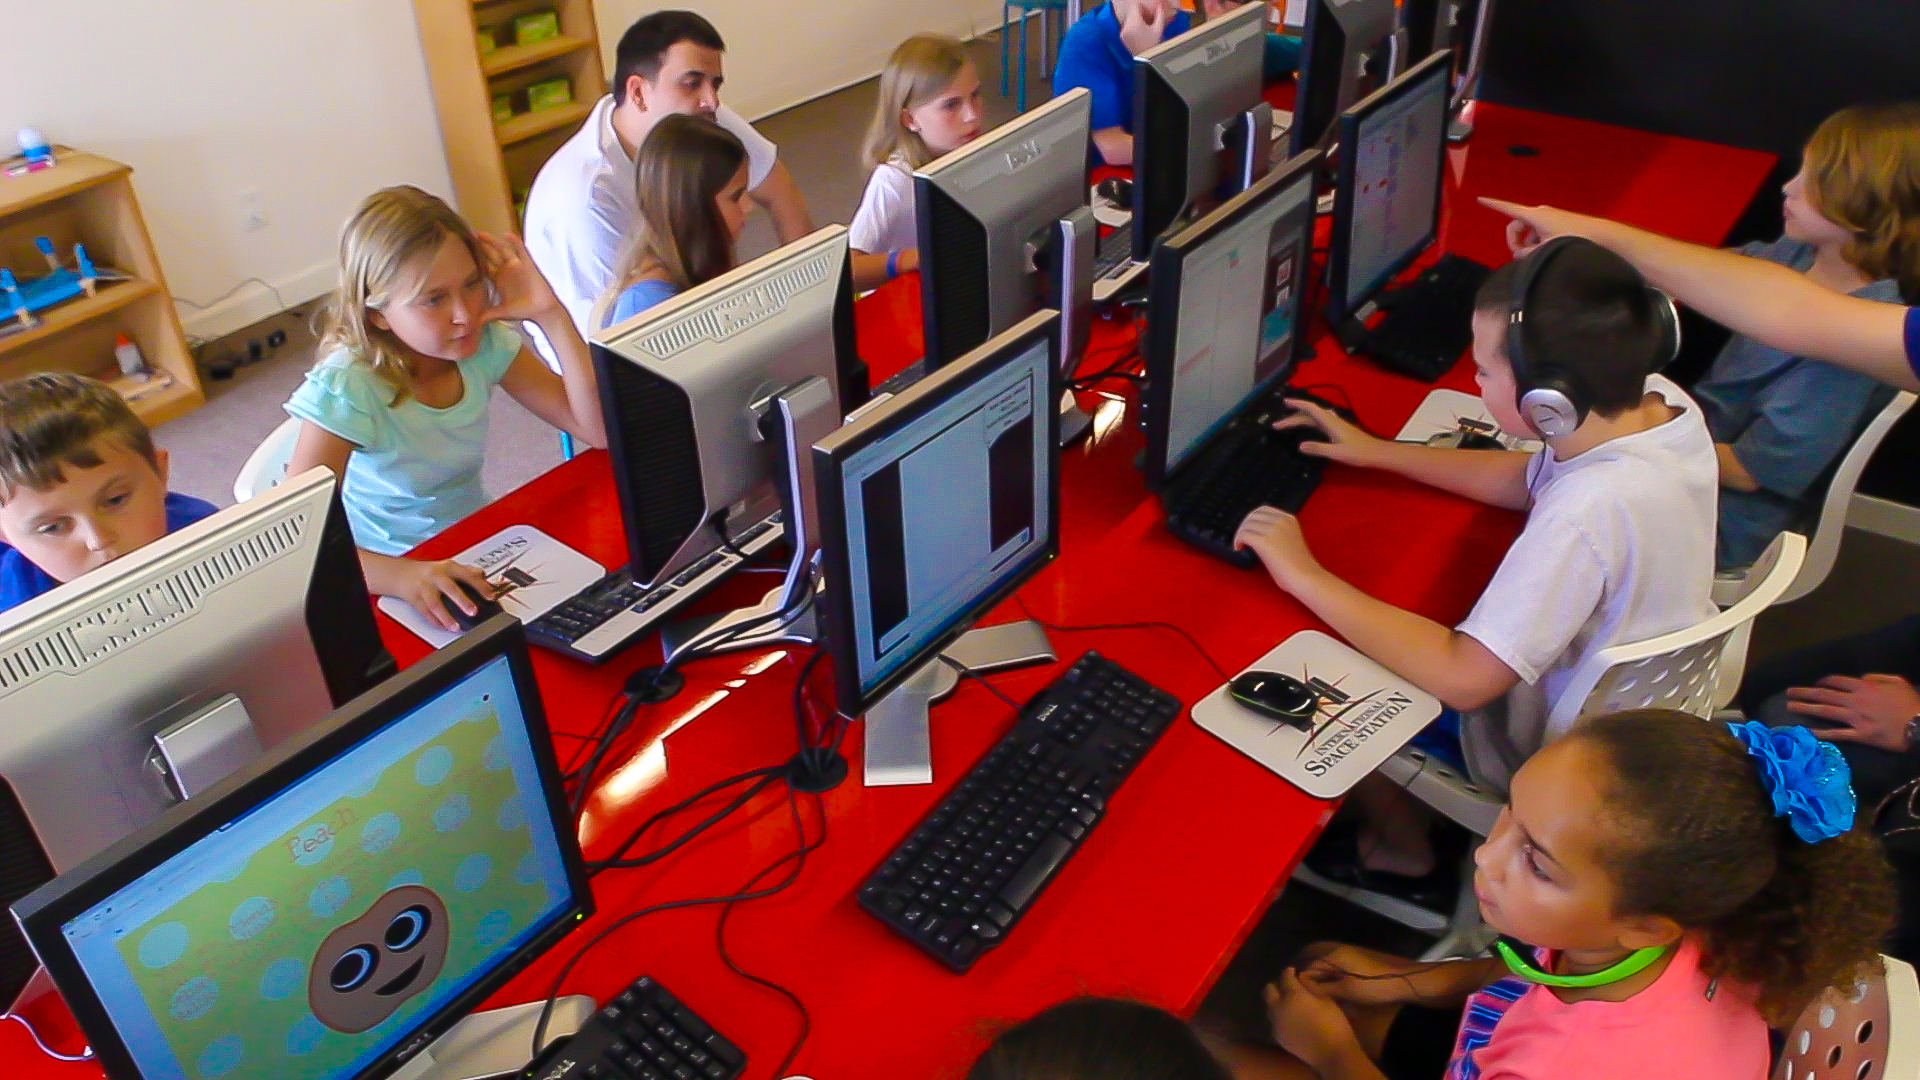 Why should kids learn to be digital creators, and computer programmers?